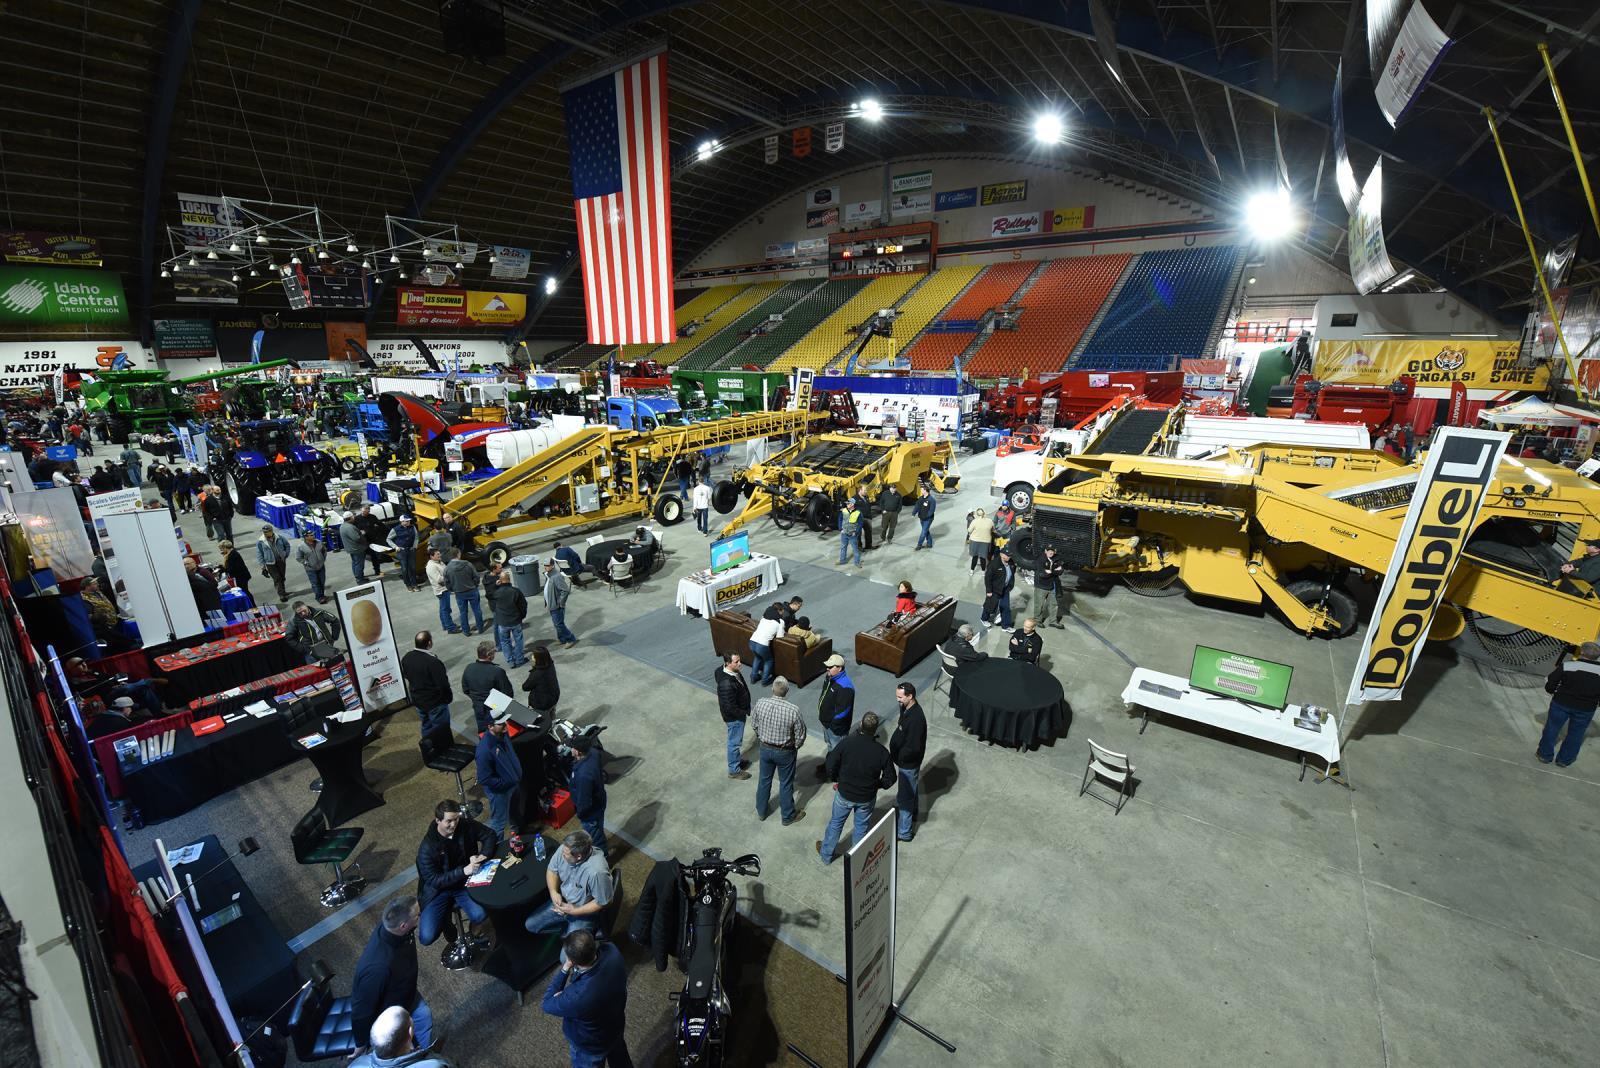 People check out farm equipment during the 2020 Eastern Idaho Ag Expo in Holt Arena in Pocatello. The Eastern Idaho Ag Expo and other farm equipment shows were held virtually this year and that might be impacting sales of farm equipment.